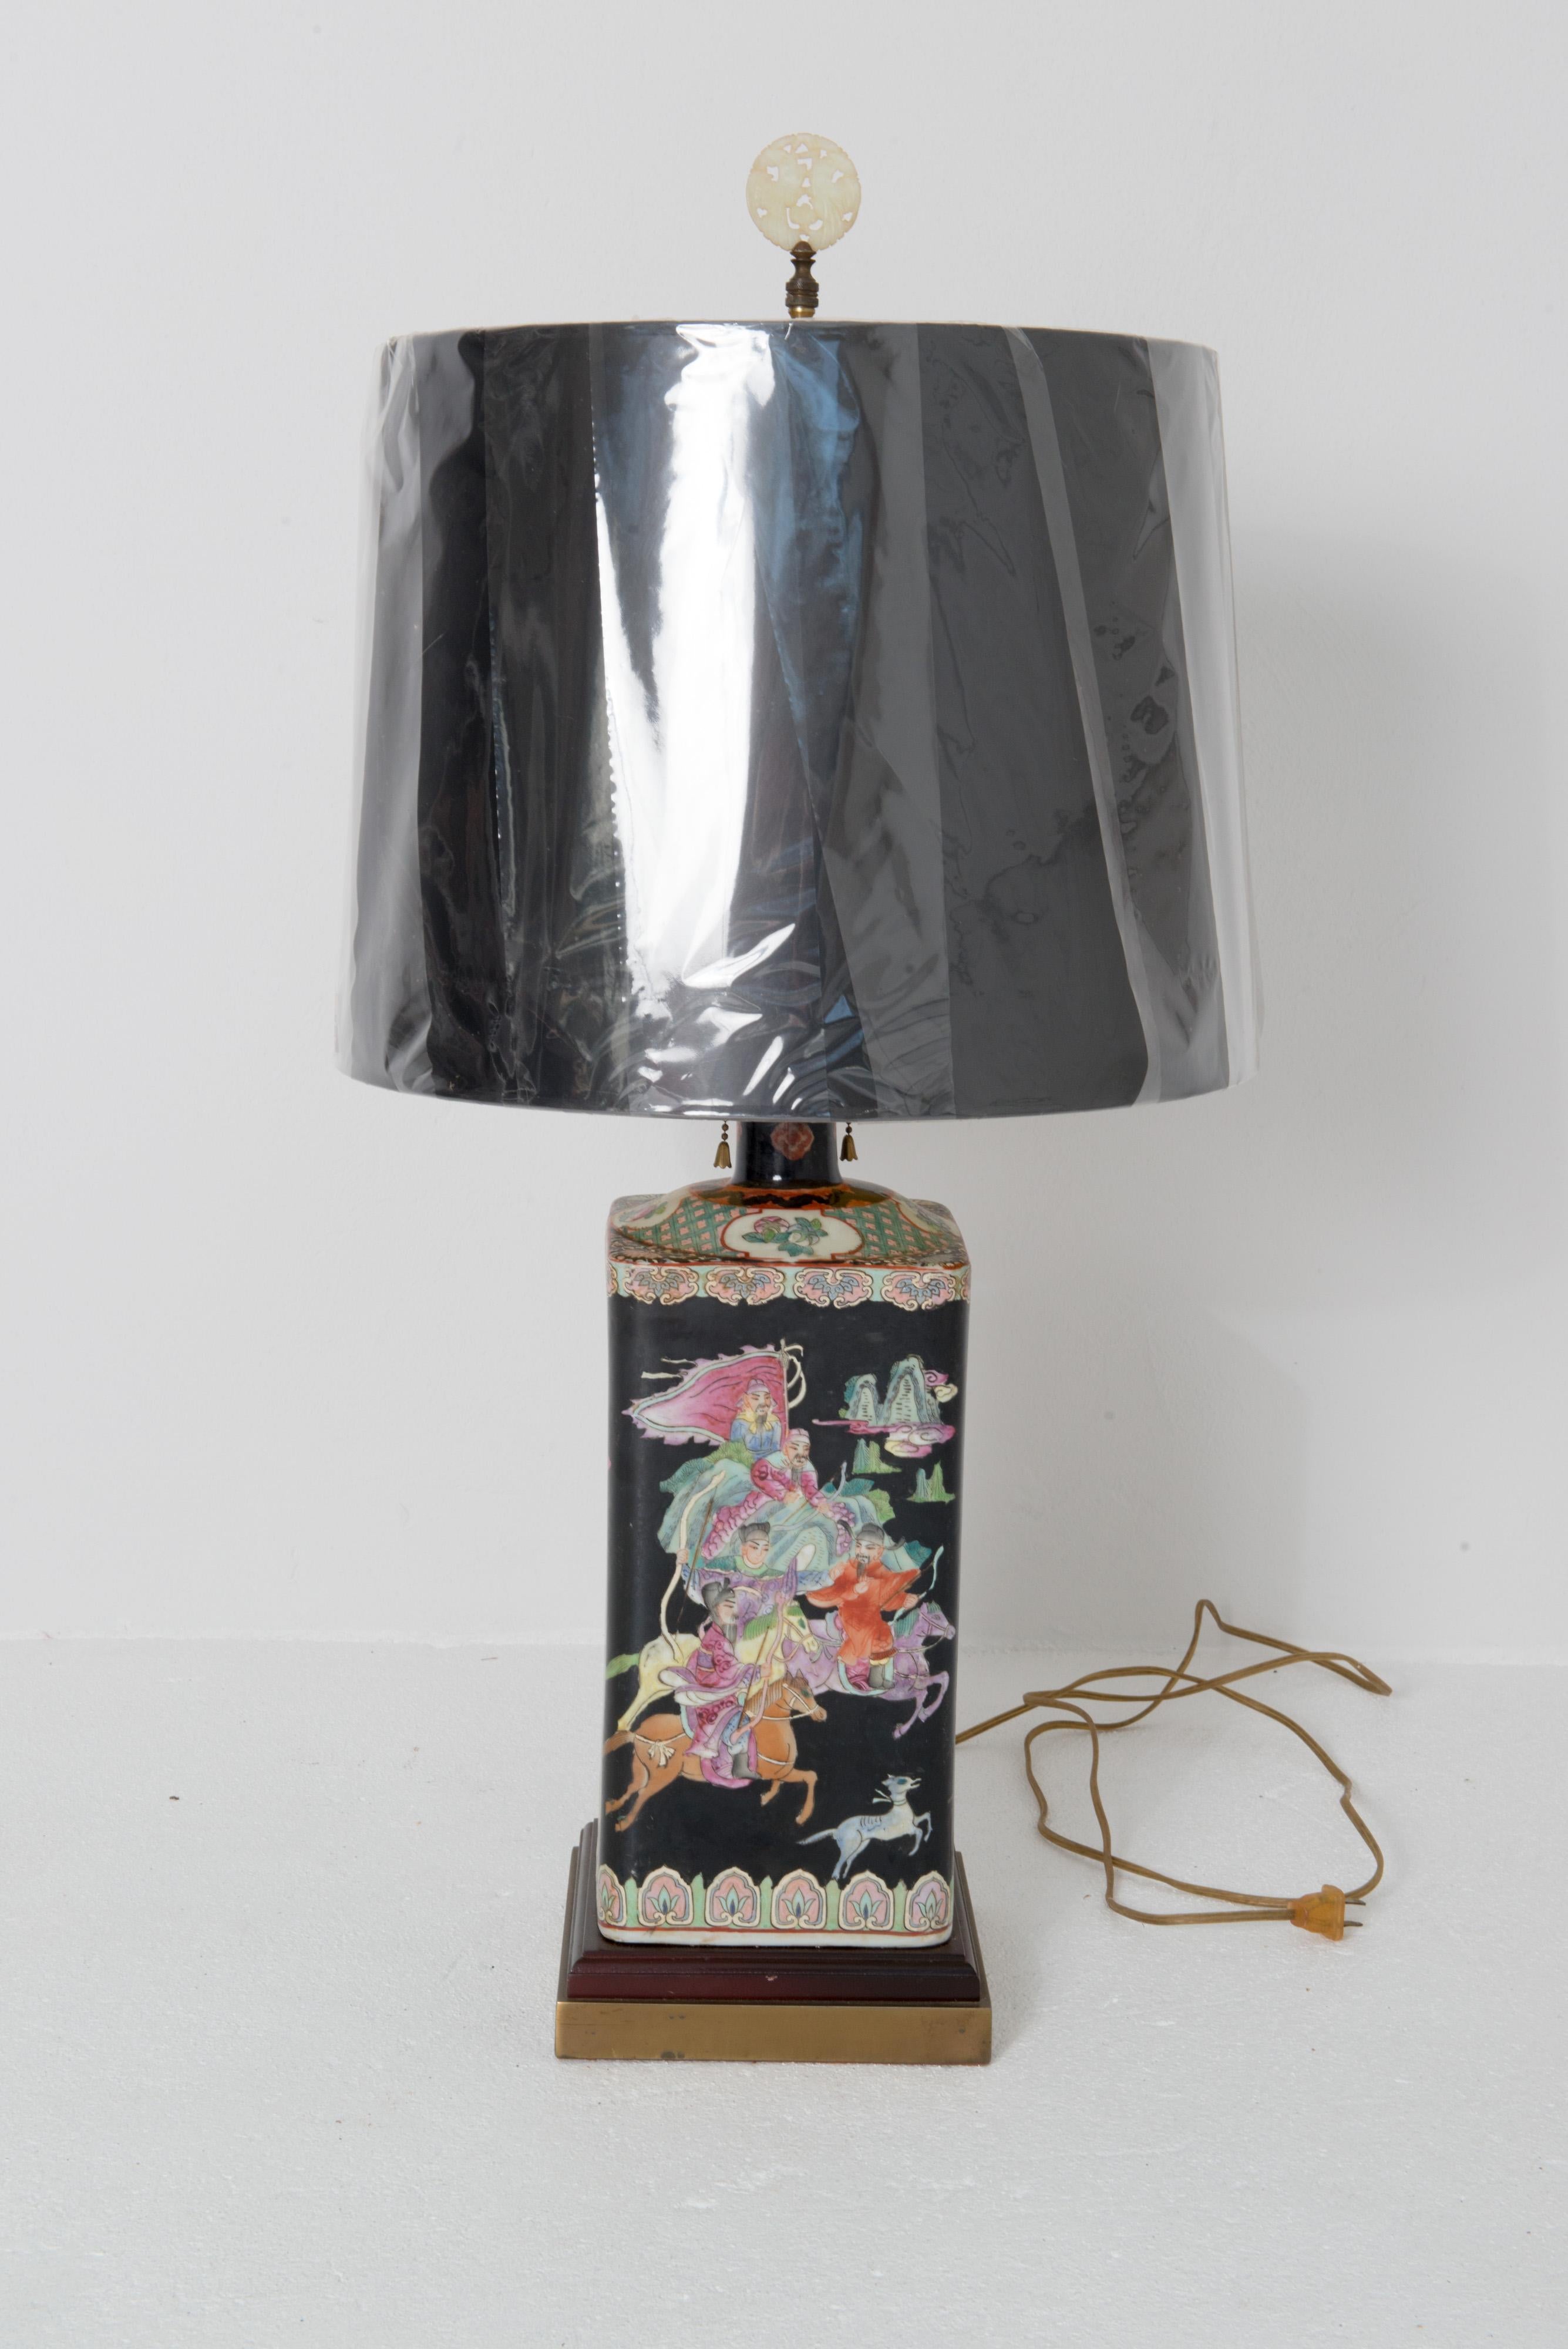 Good looking rectangular Asian black ceramic lamp. The background is black with beautiful scenic animals and figures in mint green, pinks, and tangerine. Height listed is to the top of the new paper shade. Height to the top of the ceramic vessel is